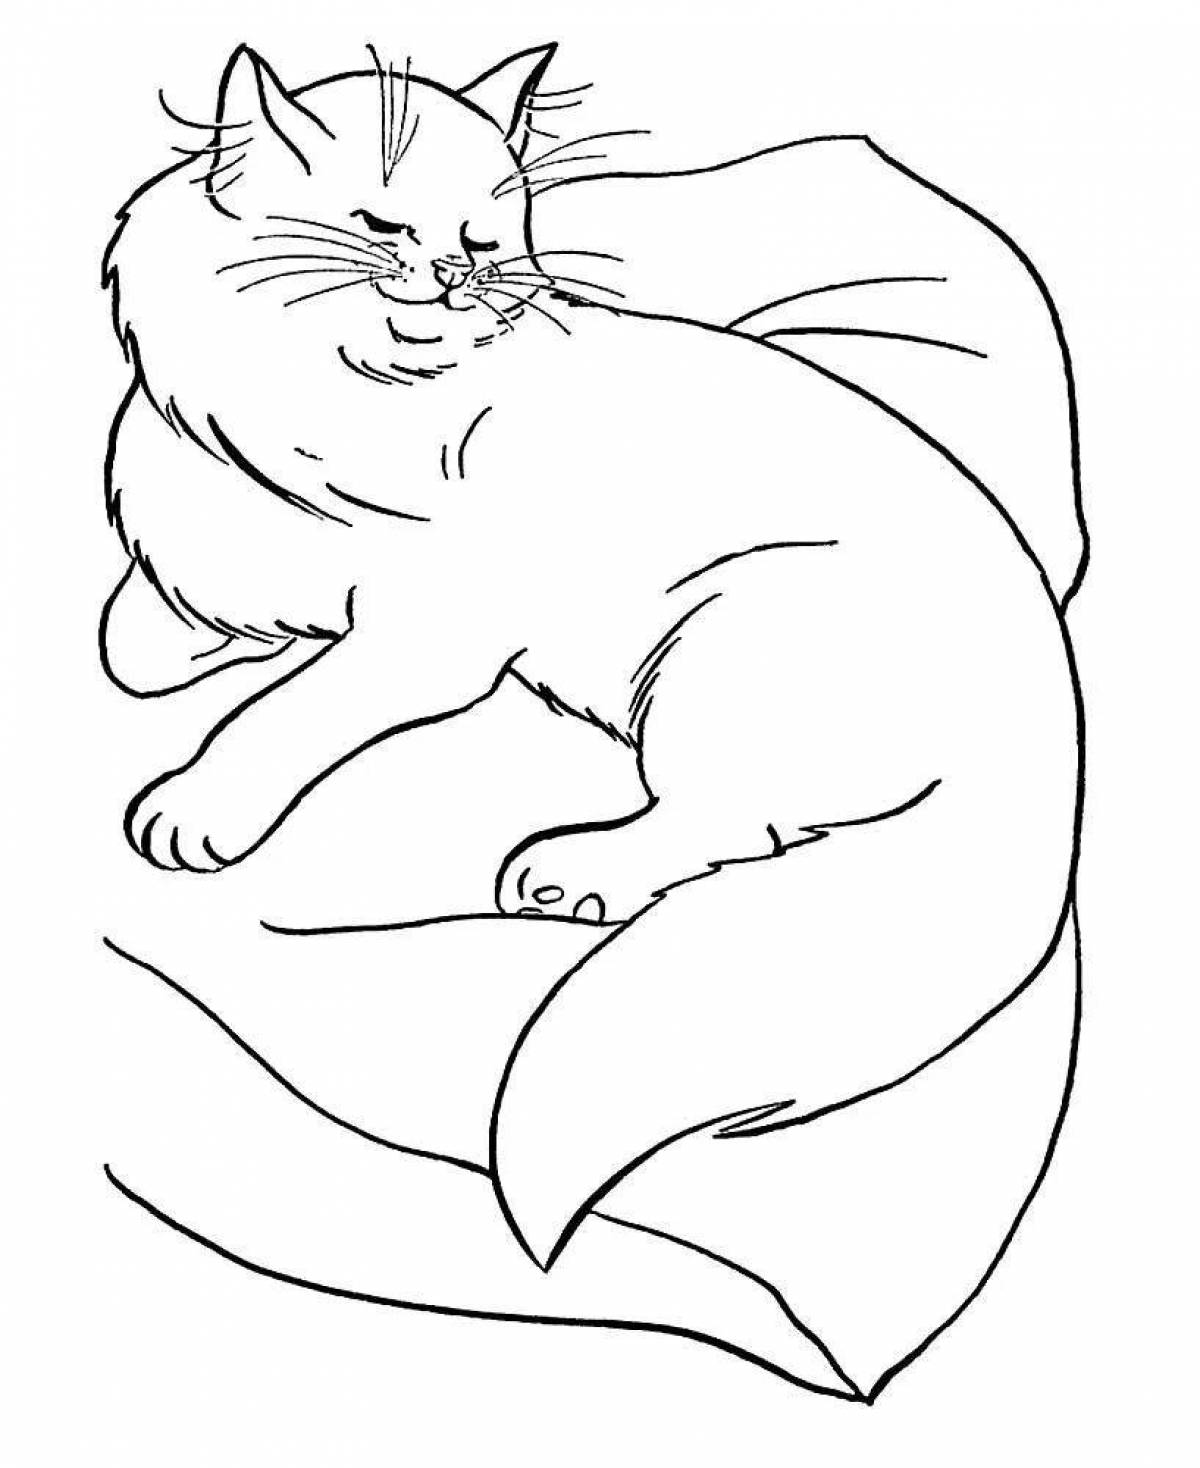 Glowing white cat coloring page